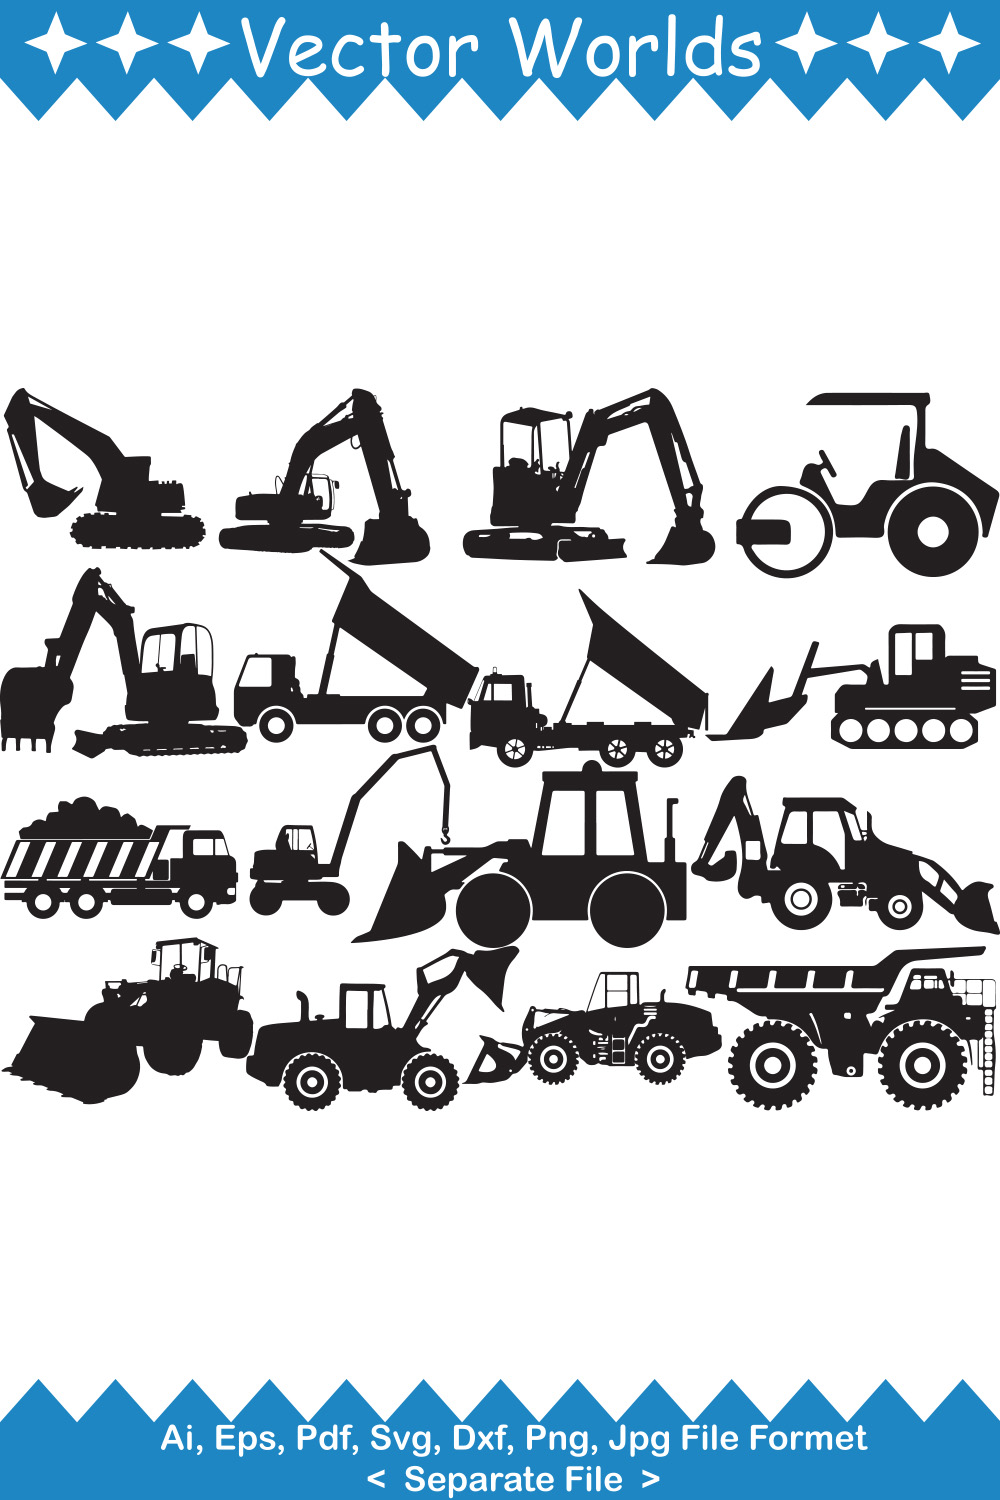 Set of wonderful vector images of silhouettes of construction machines